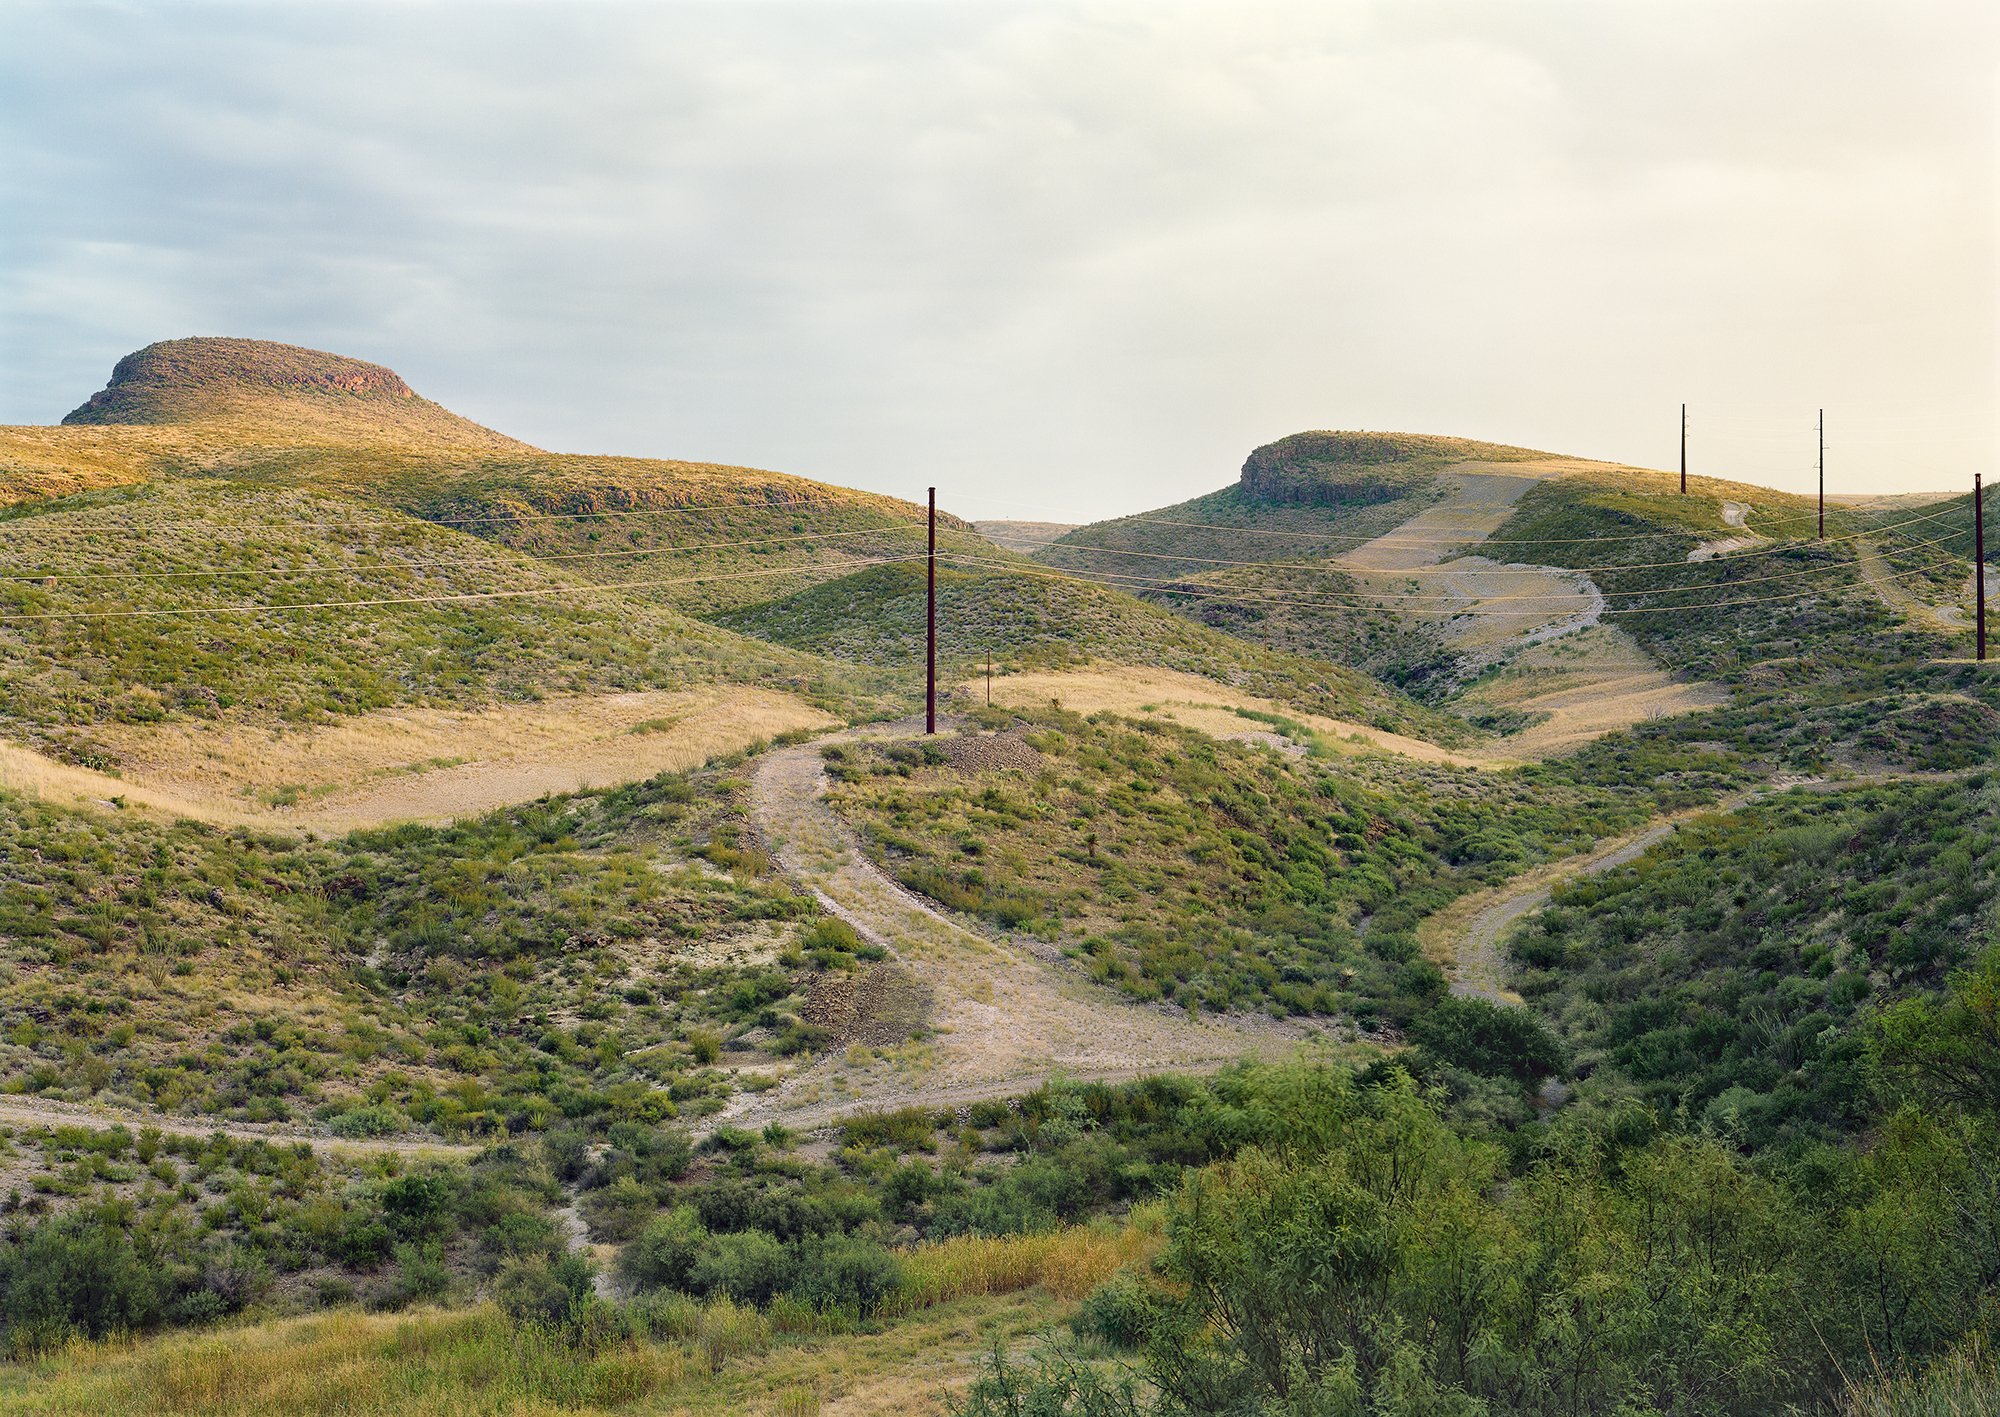 Land Scars from the Trans Pecos Pipeline, Marfa, Texas, 2019